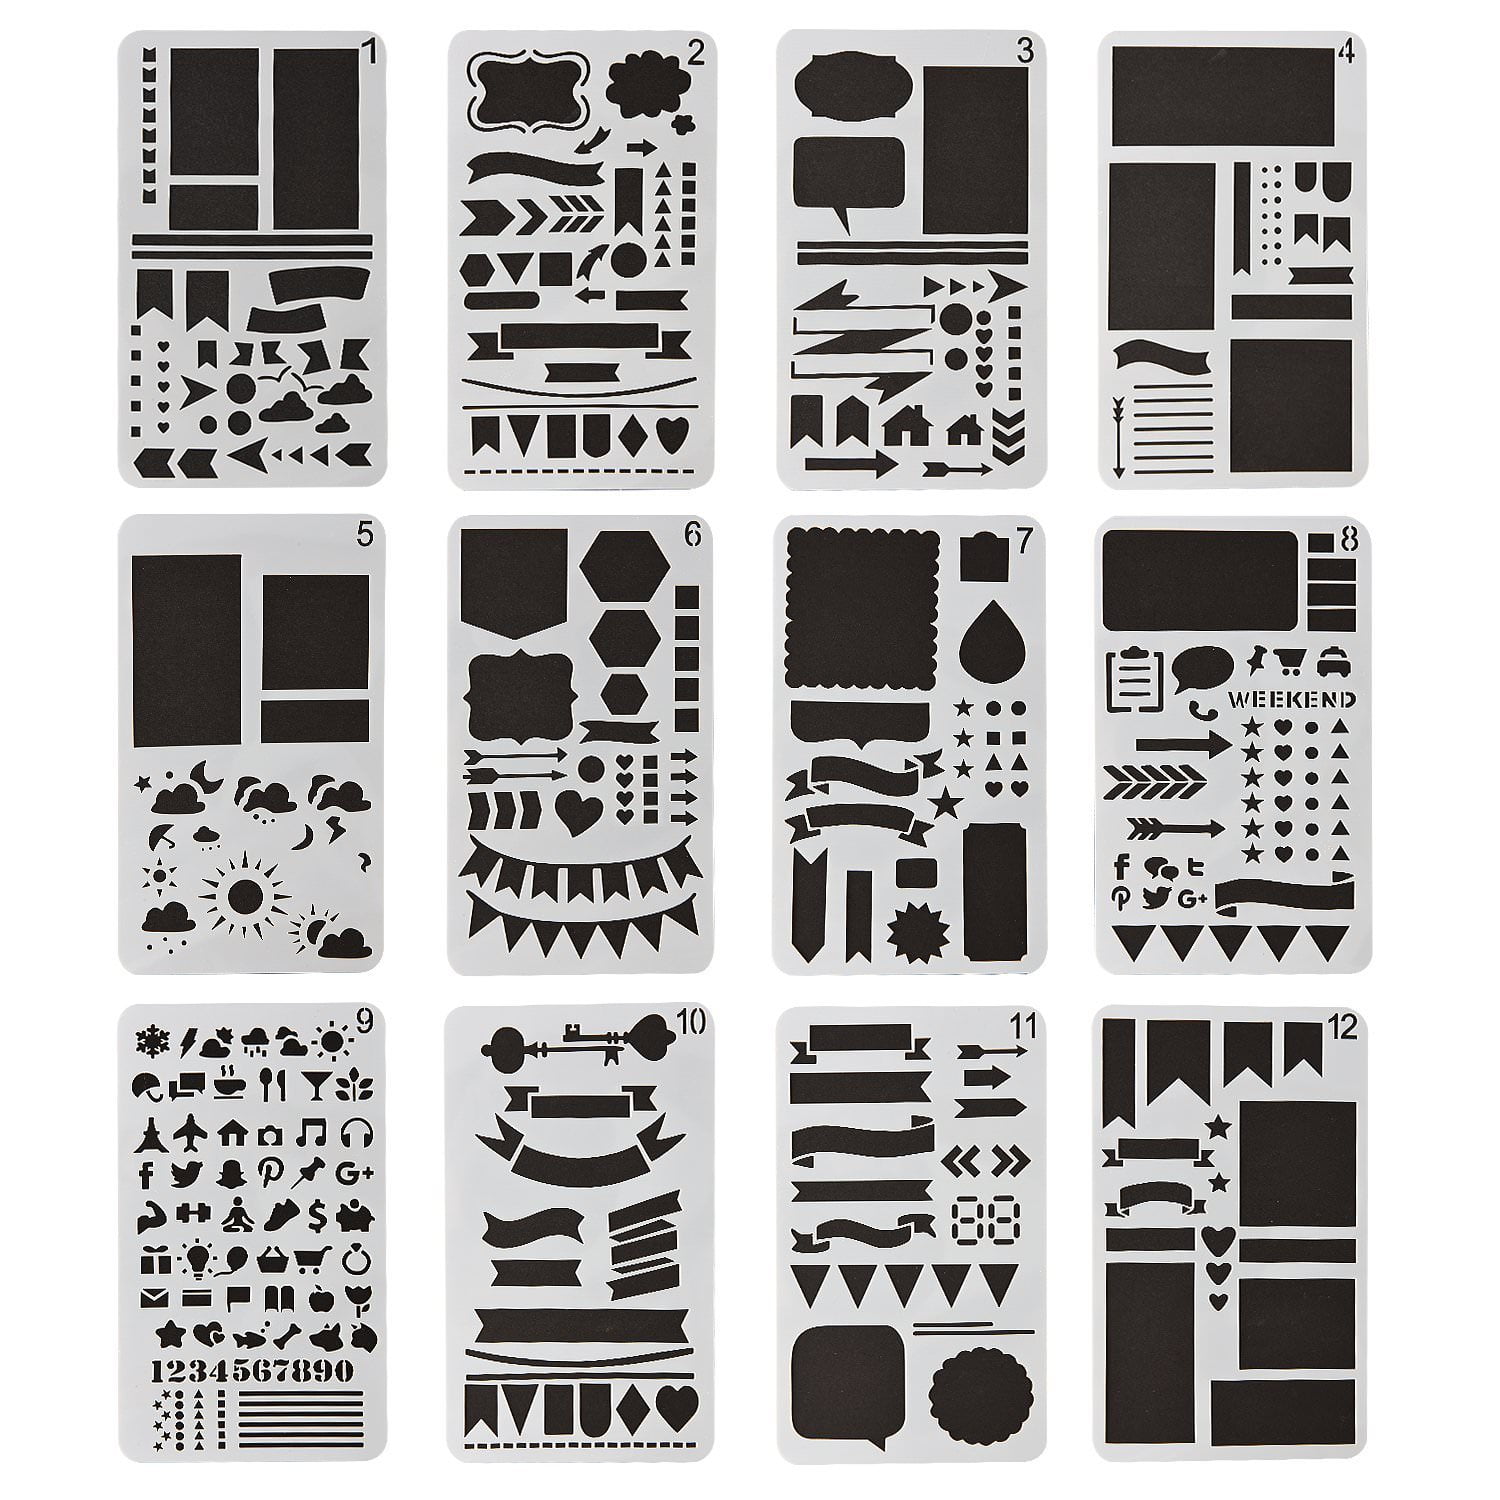 7.5 x 4.9 inch Makes Creating Layouts Easy Stencil Set for Dotted Journals Bullet Journaling Stencil Journal Stencils Stencils for DIY Journals Notebook Schedule Templates 